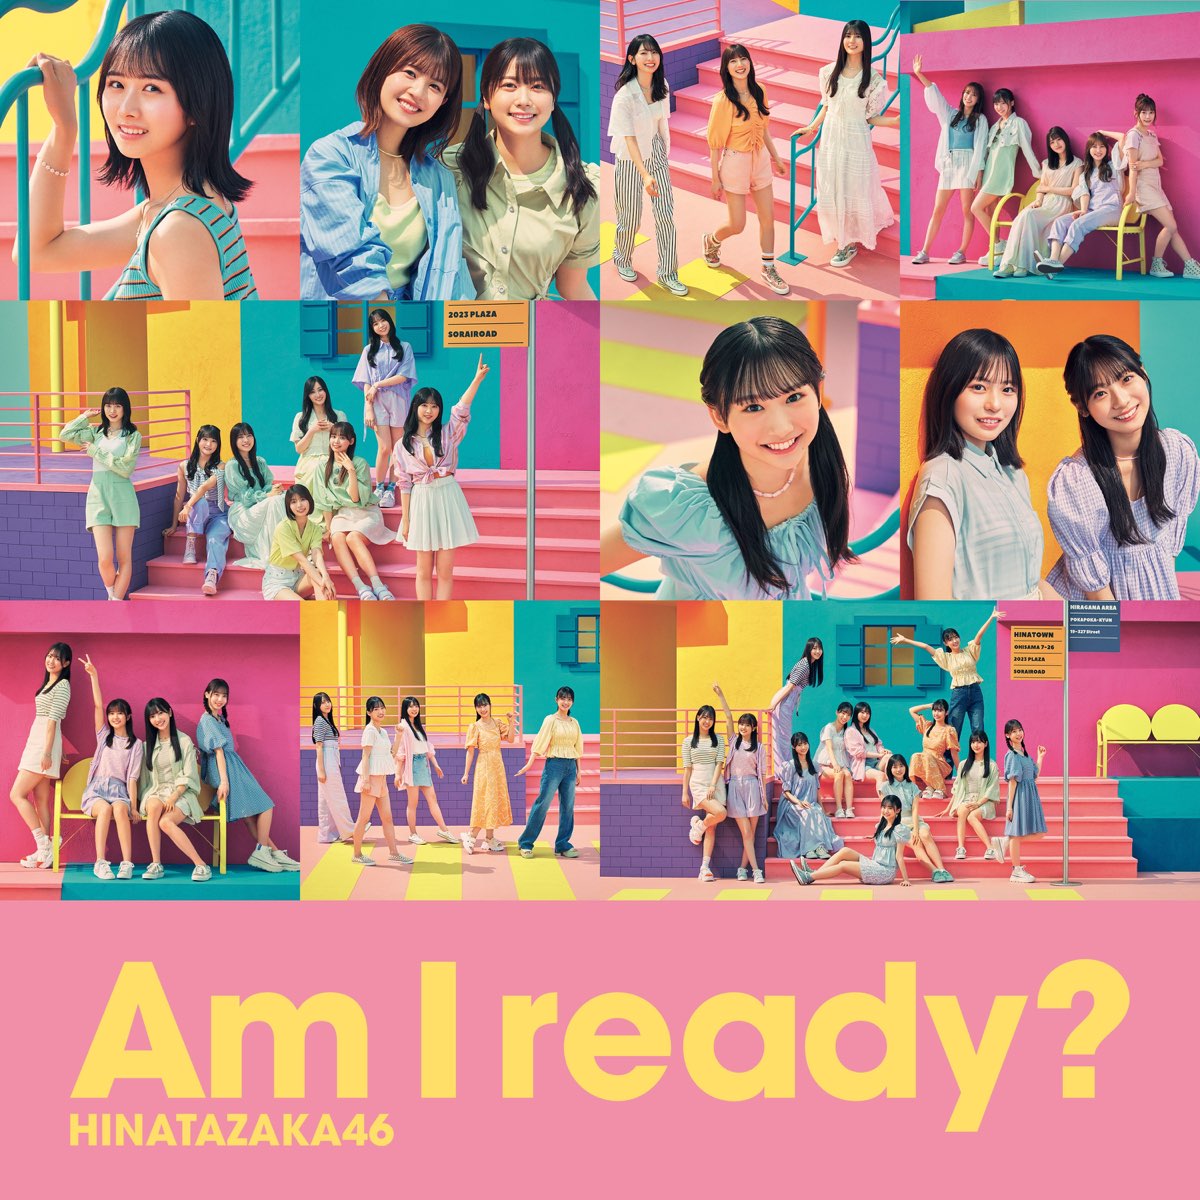 Am I ready? (Special Edition) - 日向坂46のアルバム - Apple Music